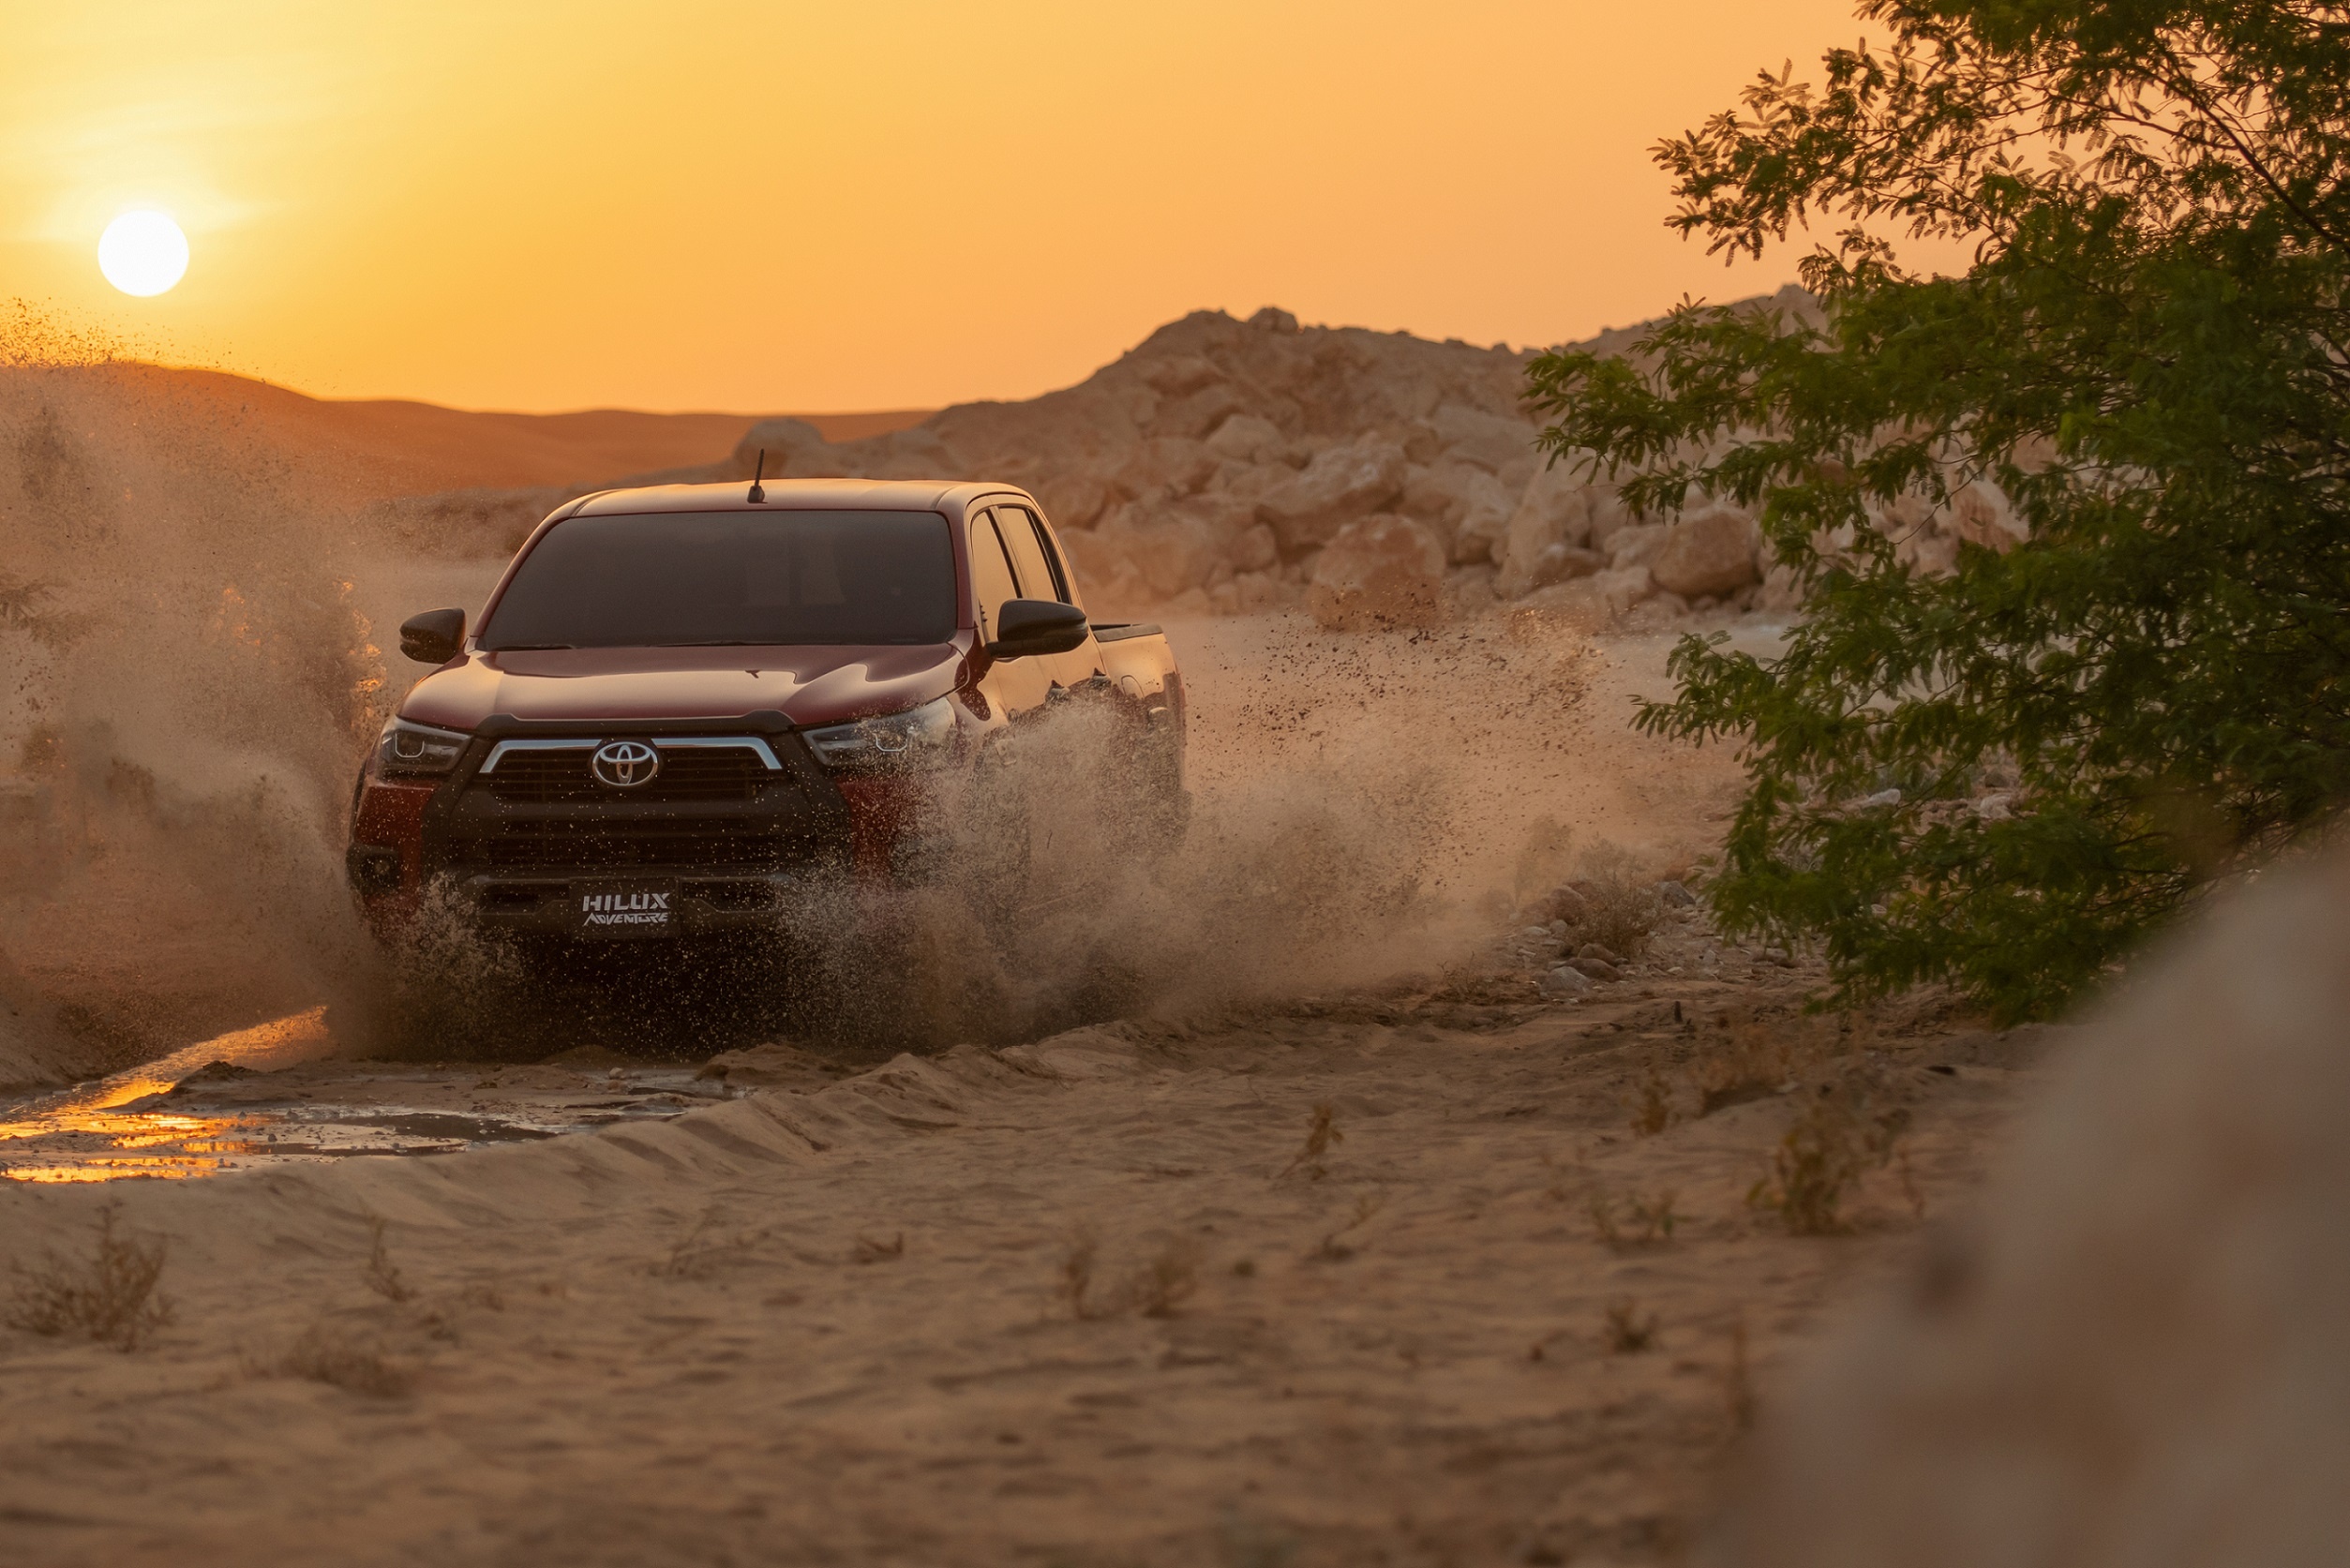 Introducing the all-new Toyota Hilux Adventure